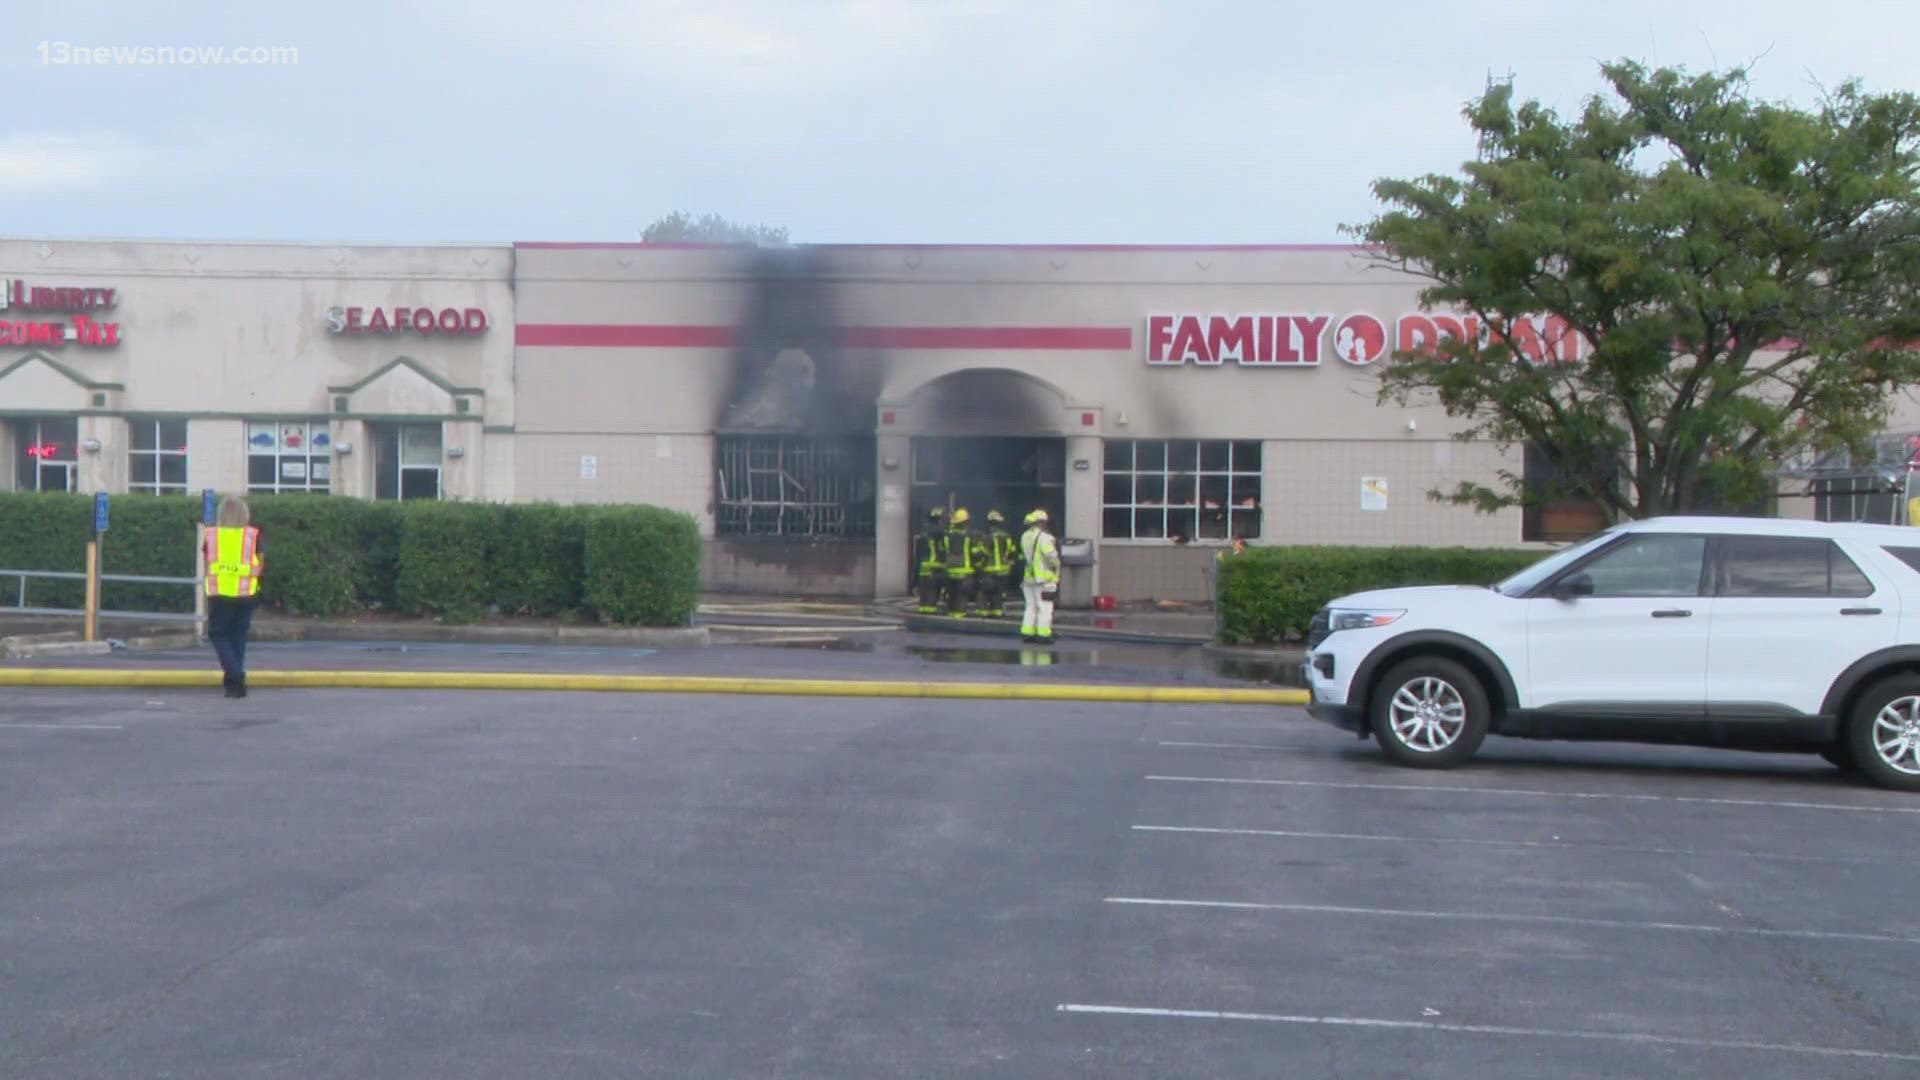 The destruction from the fire at a Family Dollar store caused four other businesses to shut down. That's causing issues for people who need basic supplies.